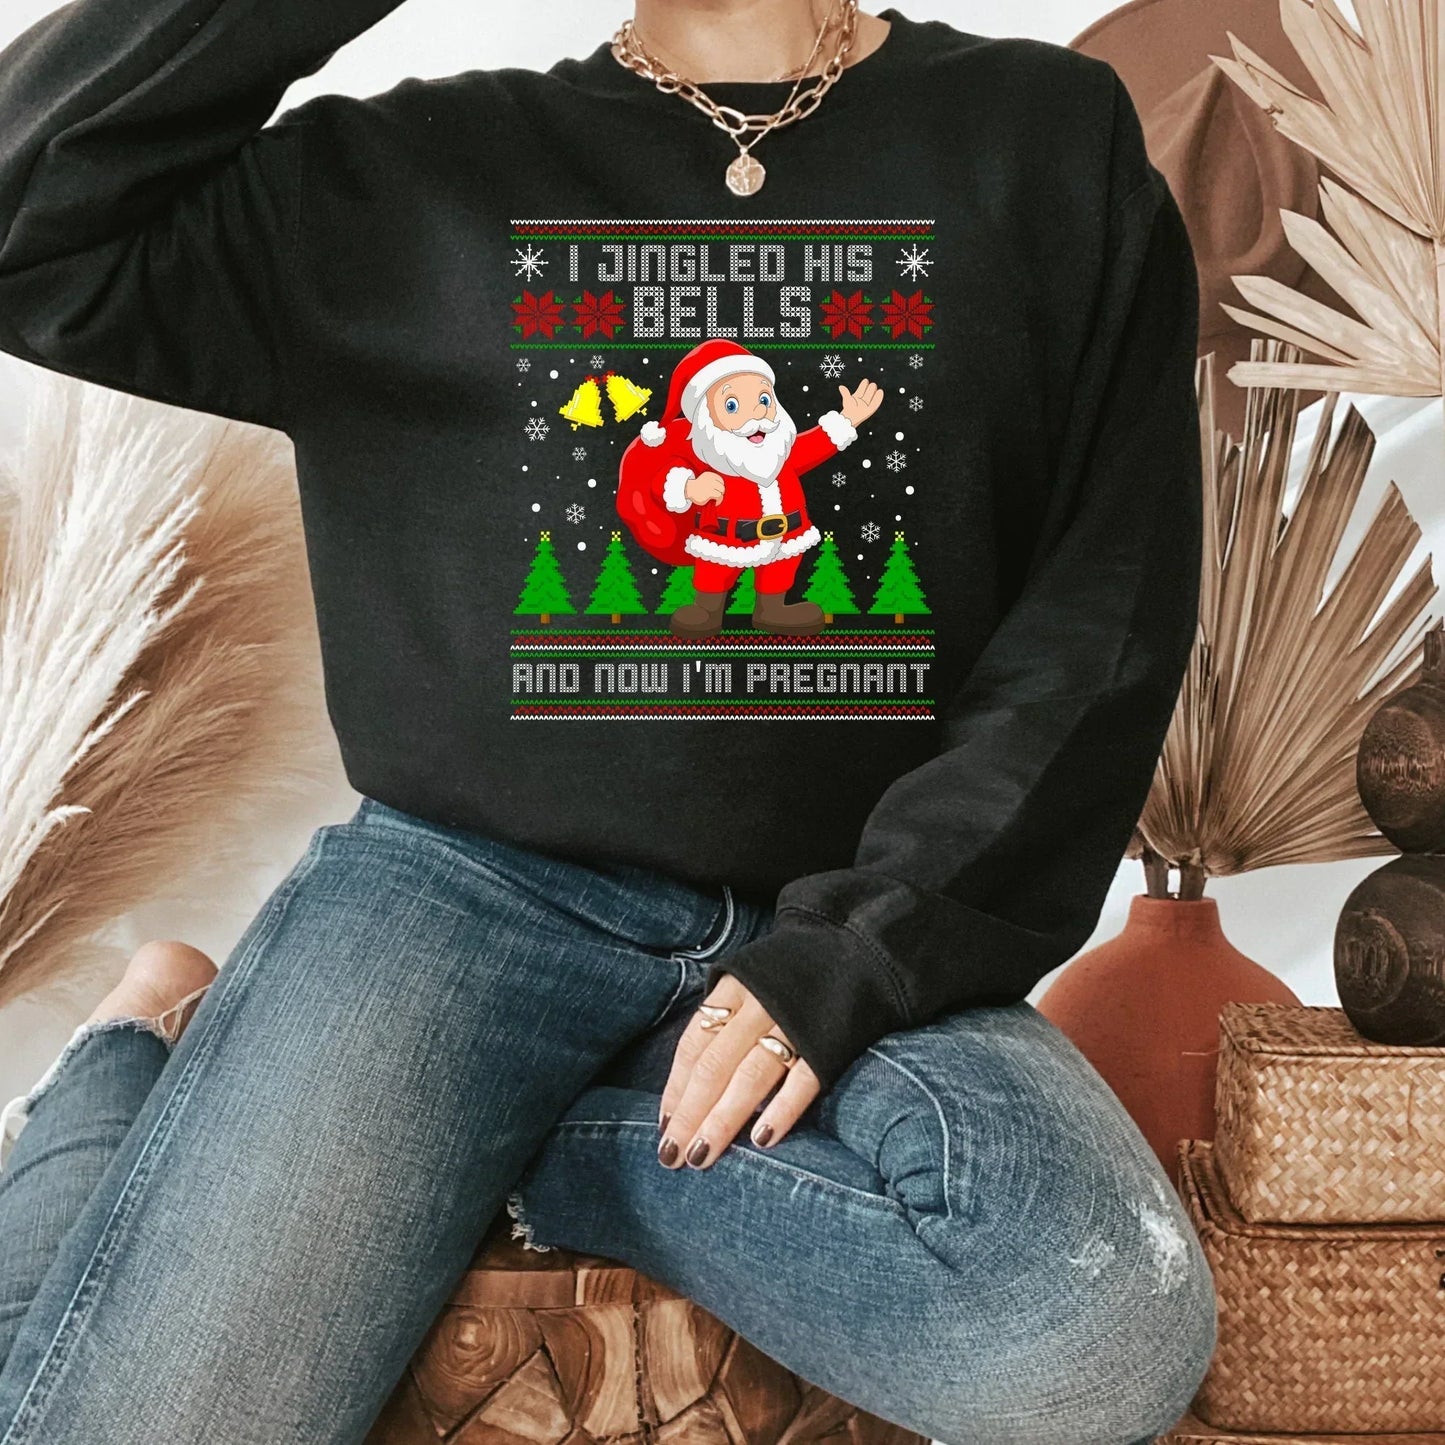 Retro Ugly Christmas Maternity Sweater, Pregnancy Reveal to Husband, Soon to Be Parents, Expecting Mother, New Baby Coming Soon Gift for Mom HMDesignStudioUS